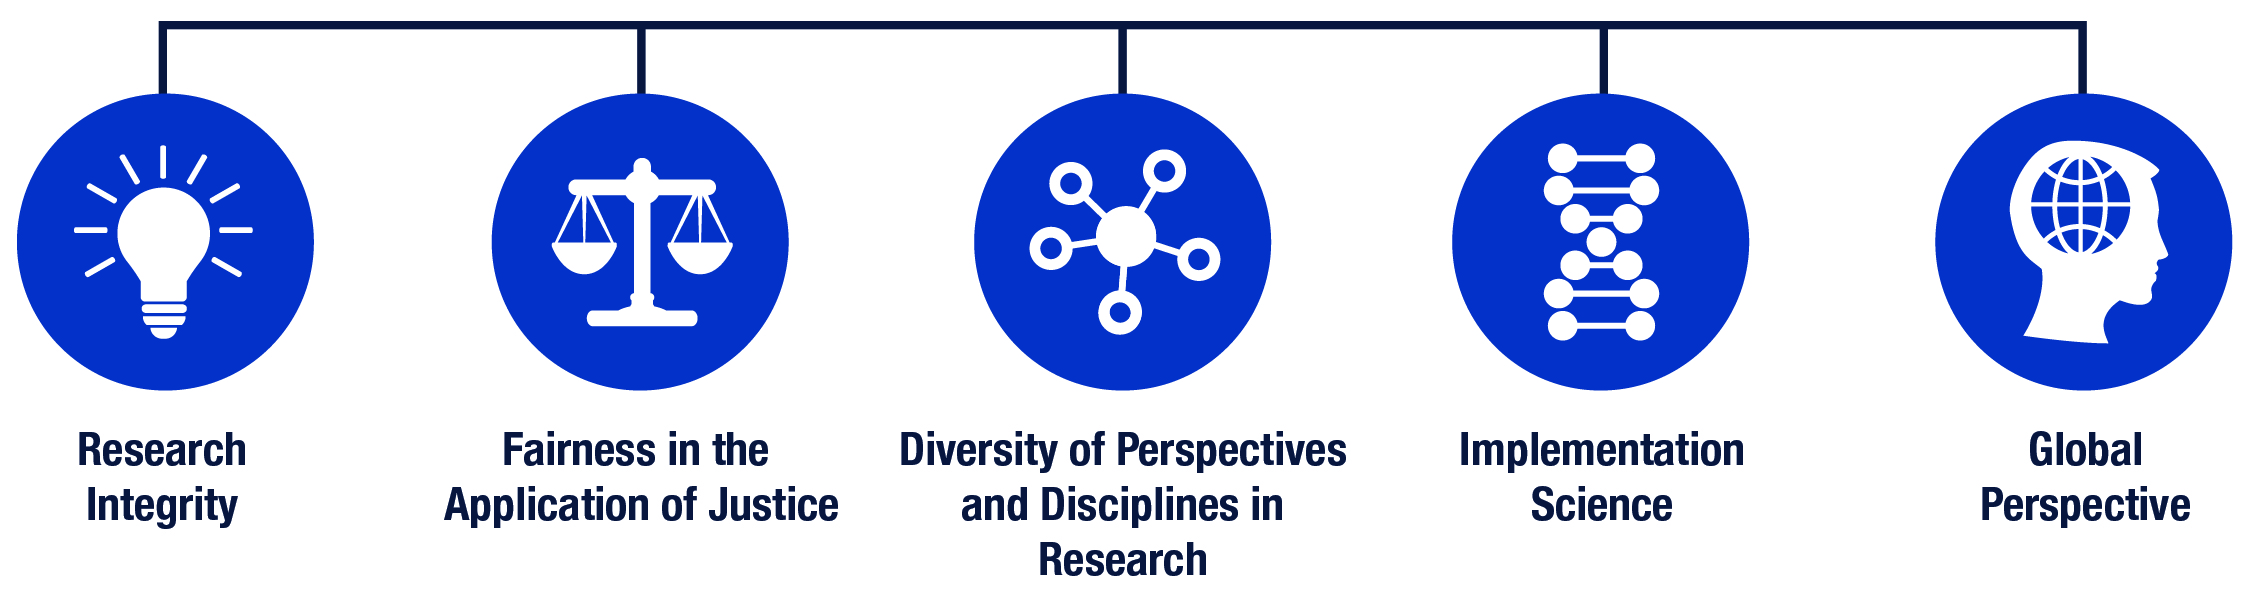 Crosscutting Themes include research integrity, fairness in the application of justice, diversity of perspectives and disciplines in research, implementation science, global persepctive